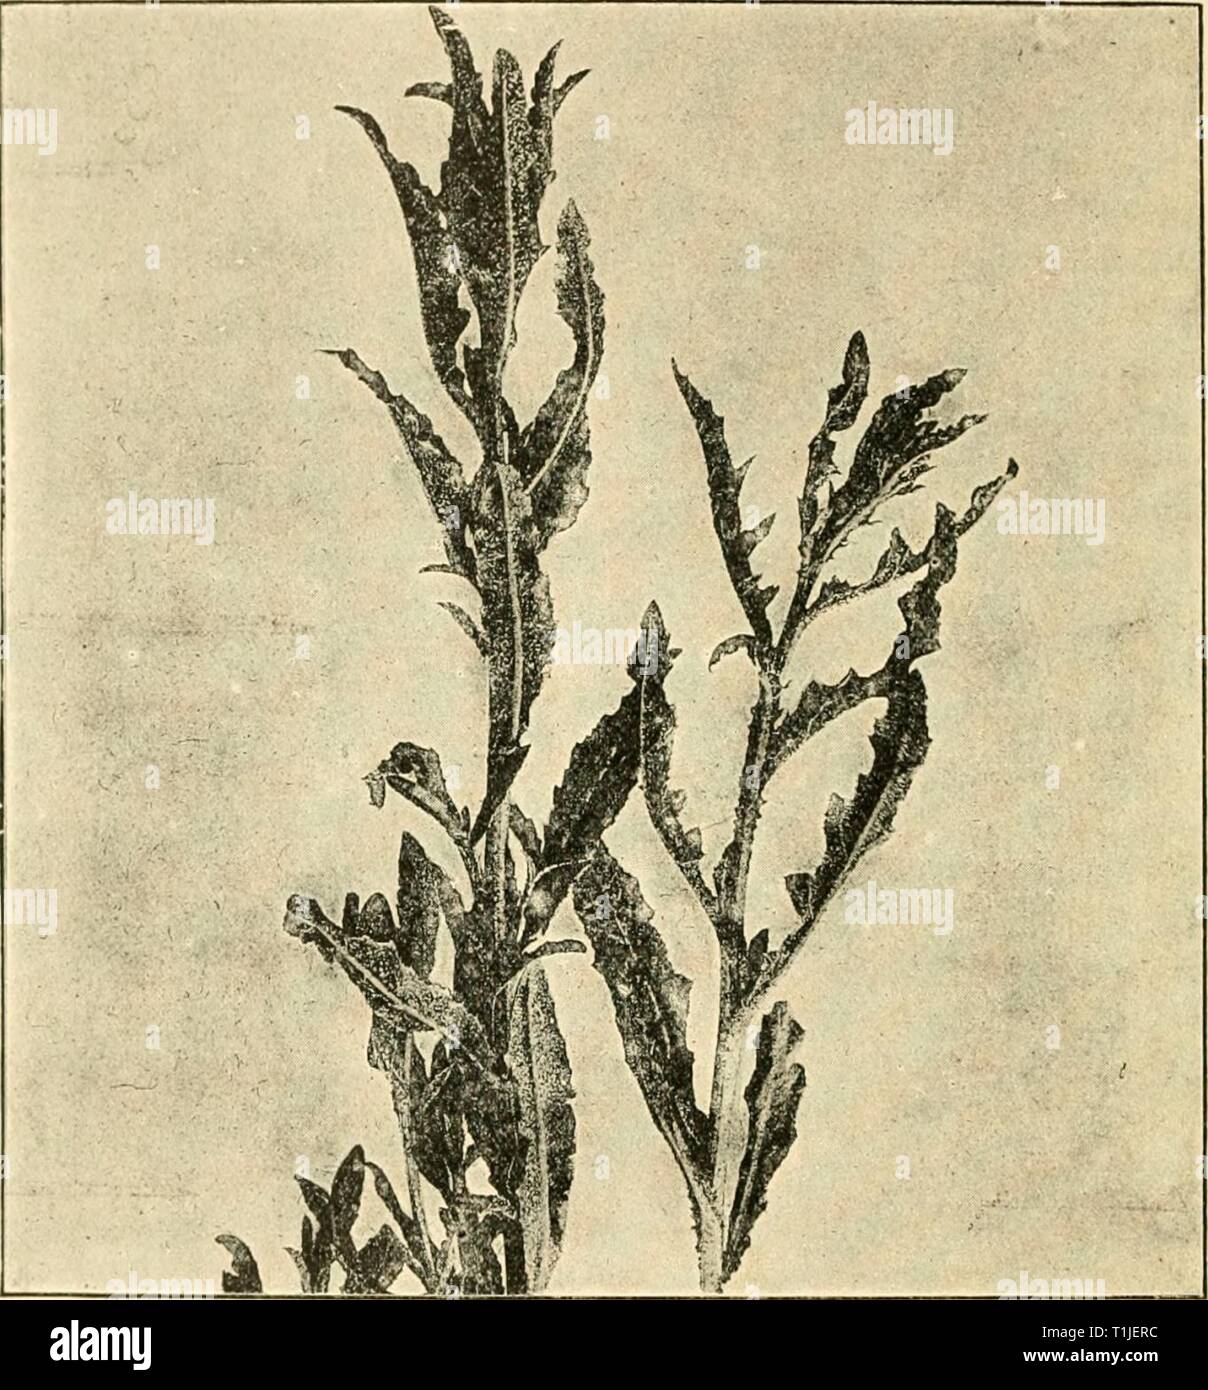 Diseases of plants induced by Diseases of plants induced by cryptogamic parasites; introduction to the study of pathogenic Fungi, slime-Fungi, bacteria, & Algae  diseasesofplants00tube Year: 1897  35: UREDINEAE. aecidia {Aec. parnassiae Schleclit.) oi jycnidia are unknown Parnassid palustris. Sperniogonial pycniclia are unknown. P. scirpi D. C. (Britain). Uredo- and teleutospoi-es on Scirpus; aecidia, according to Chodat, = .1 ea nymphaeoides on Nymphaea, JViphar, and JJvi- accor nInU'OHh:    l-'iii. h&gt;i. — l'iixfiiiM soMAtolins on Cirsiain urvensc. Tlie plants are abnormally elongated ; t Stock Photo